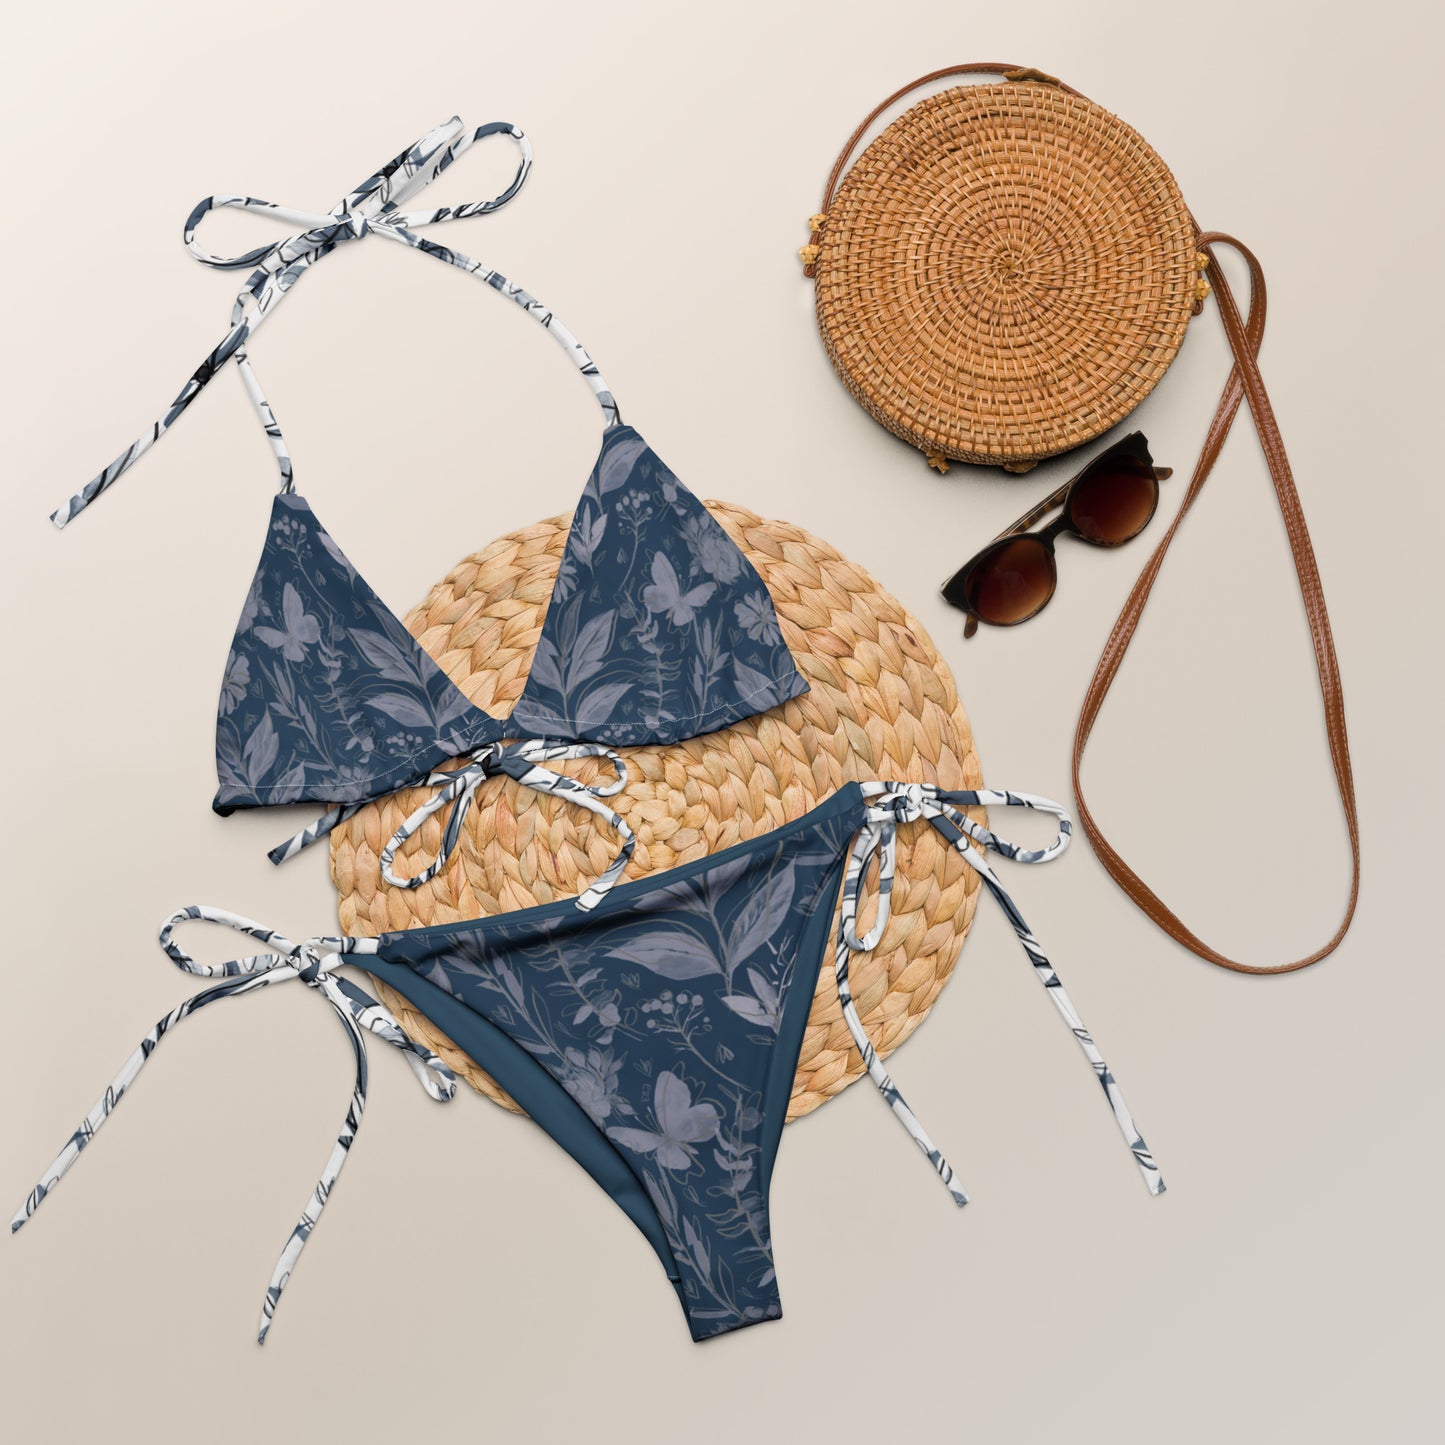 Watercolor Blue & White recycled string bikini. Houston Collection. Design hand-painted by the Designer Maria Alejandra Echenique